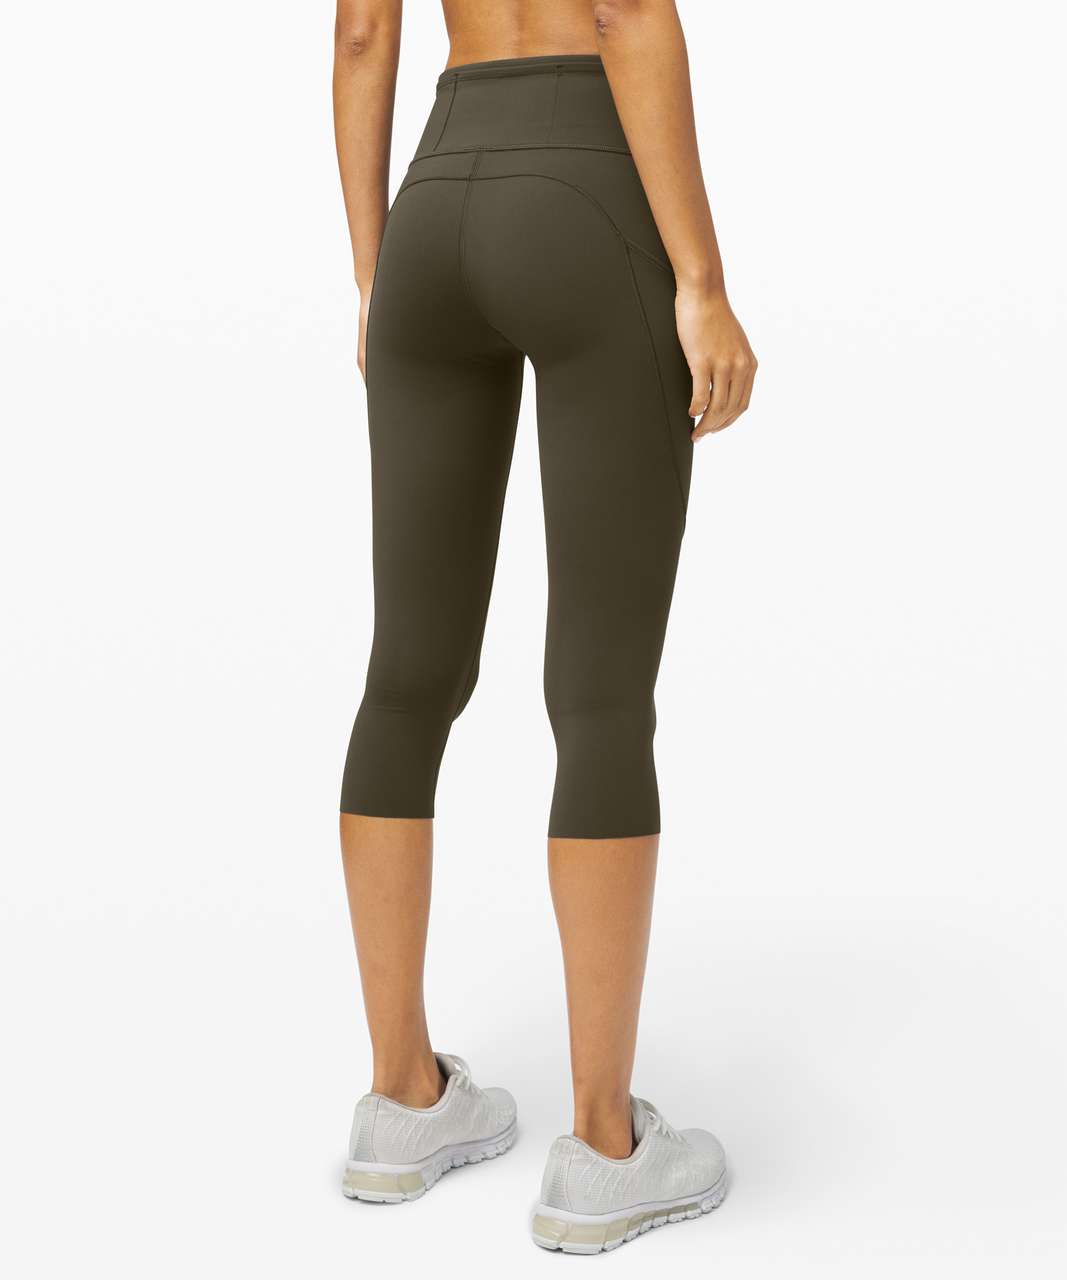 Lululemon Fast and Free Crop II 19 *Non-Reflective - Dark Olive